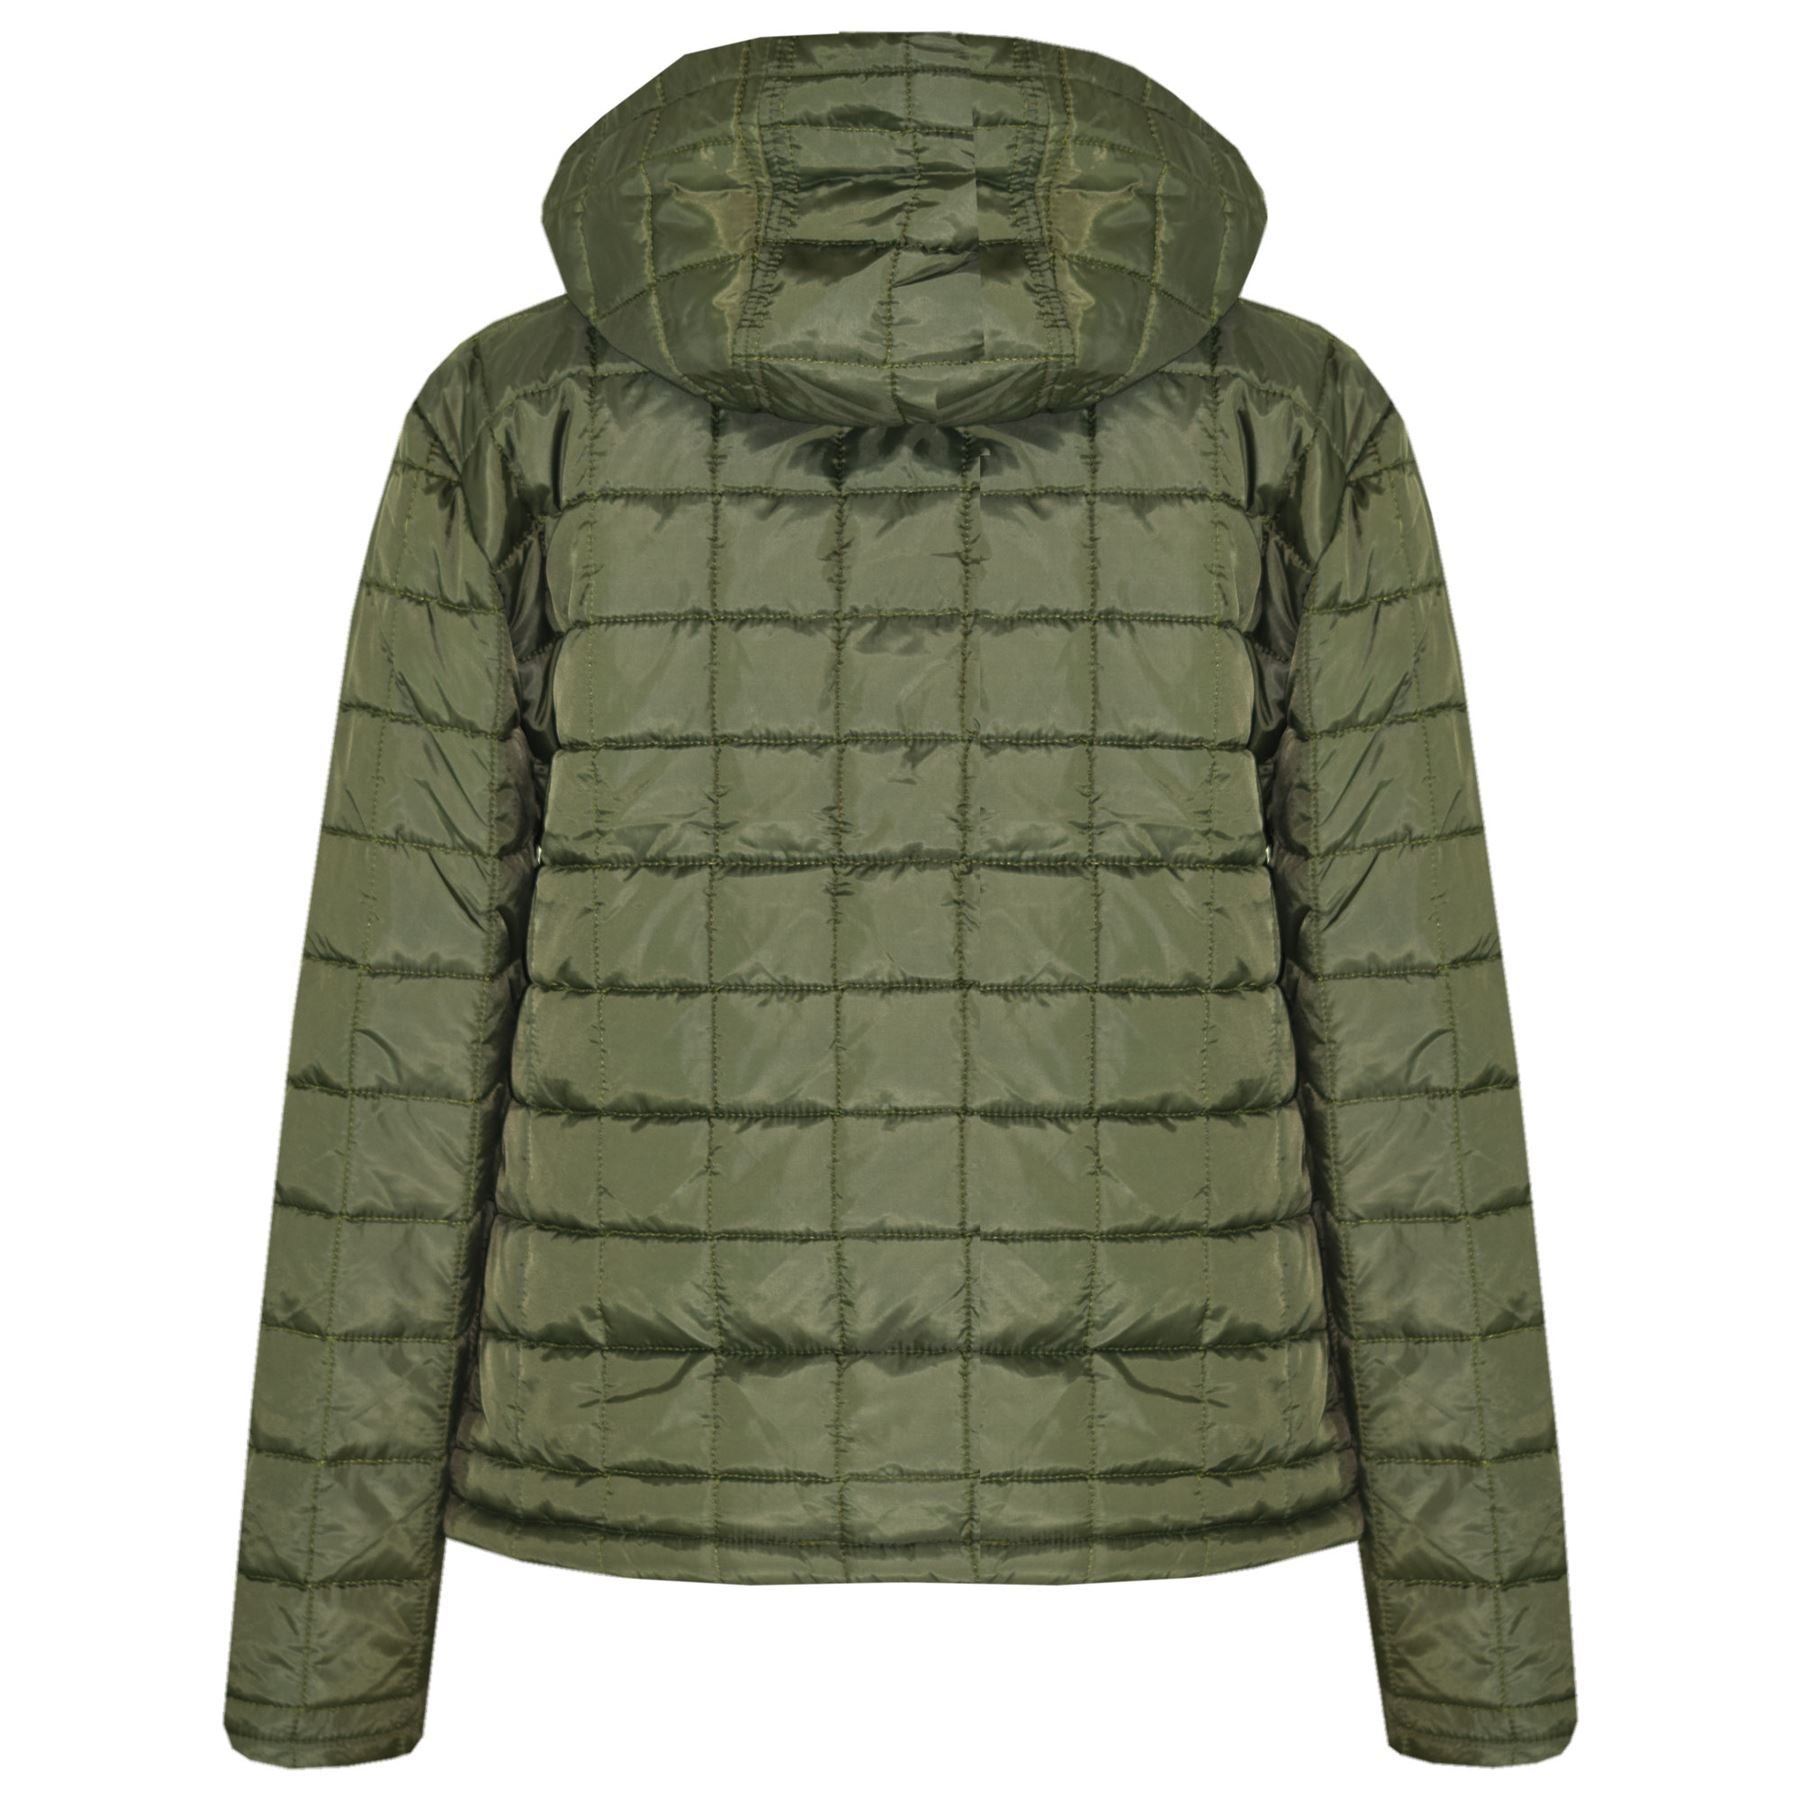 Kids Padded Olive Jackets Boys Hooded Puffer